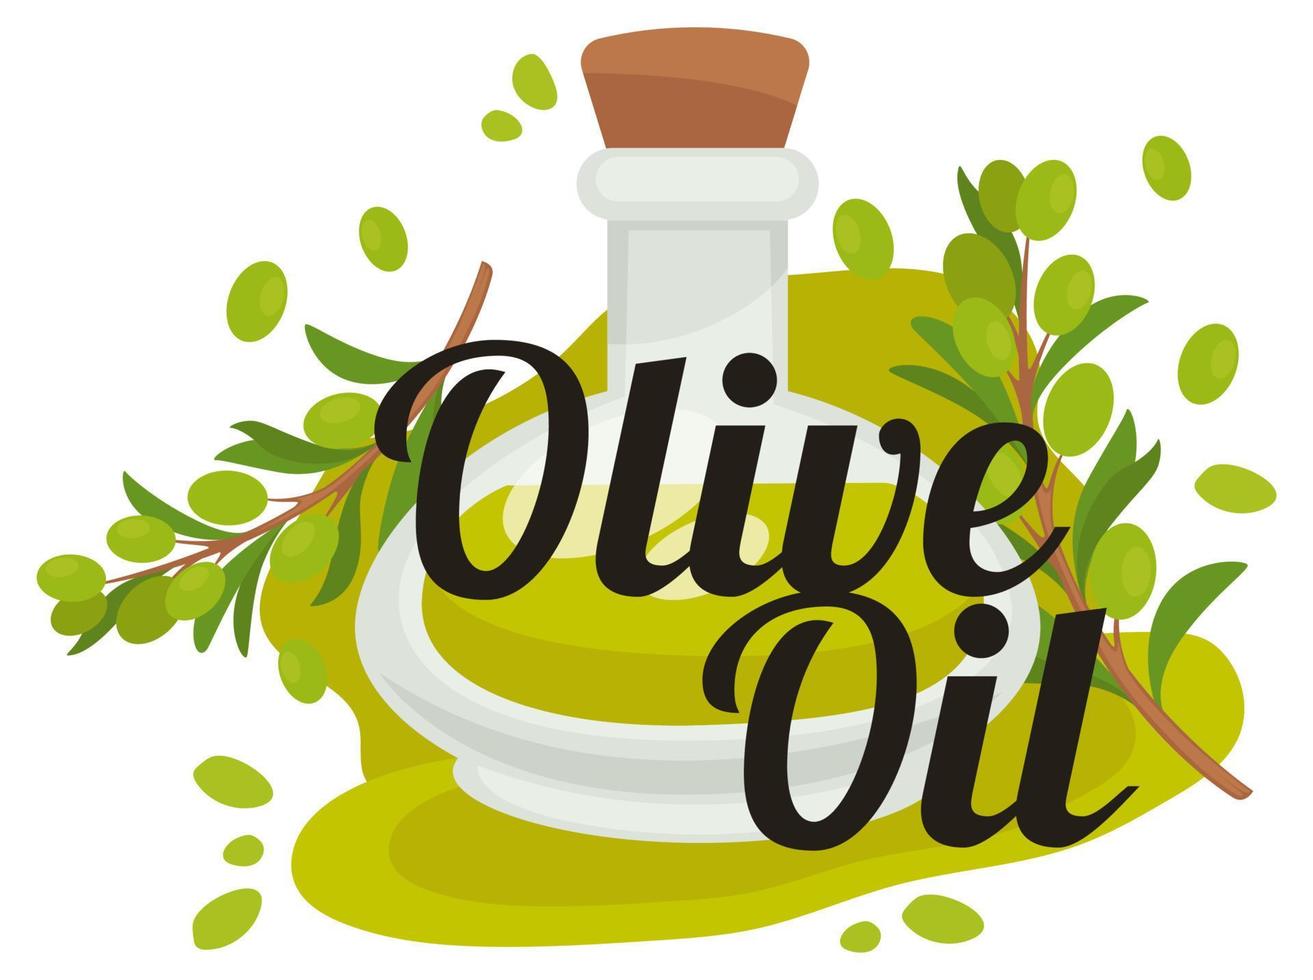 Olive oil organic and natural essence in bottle vector